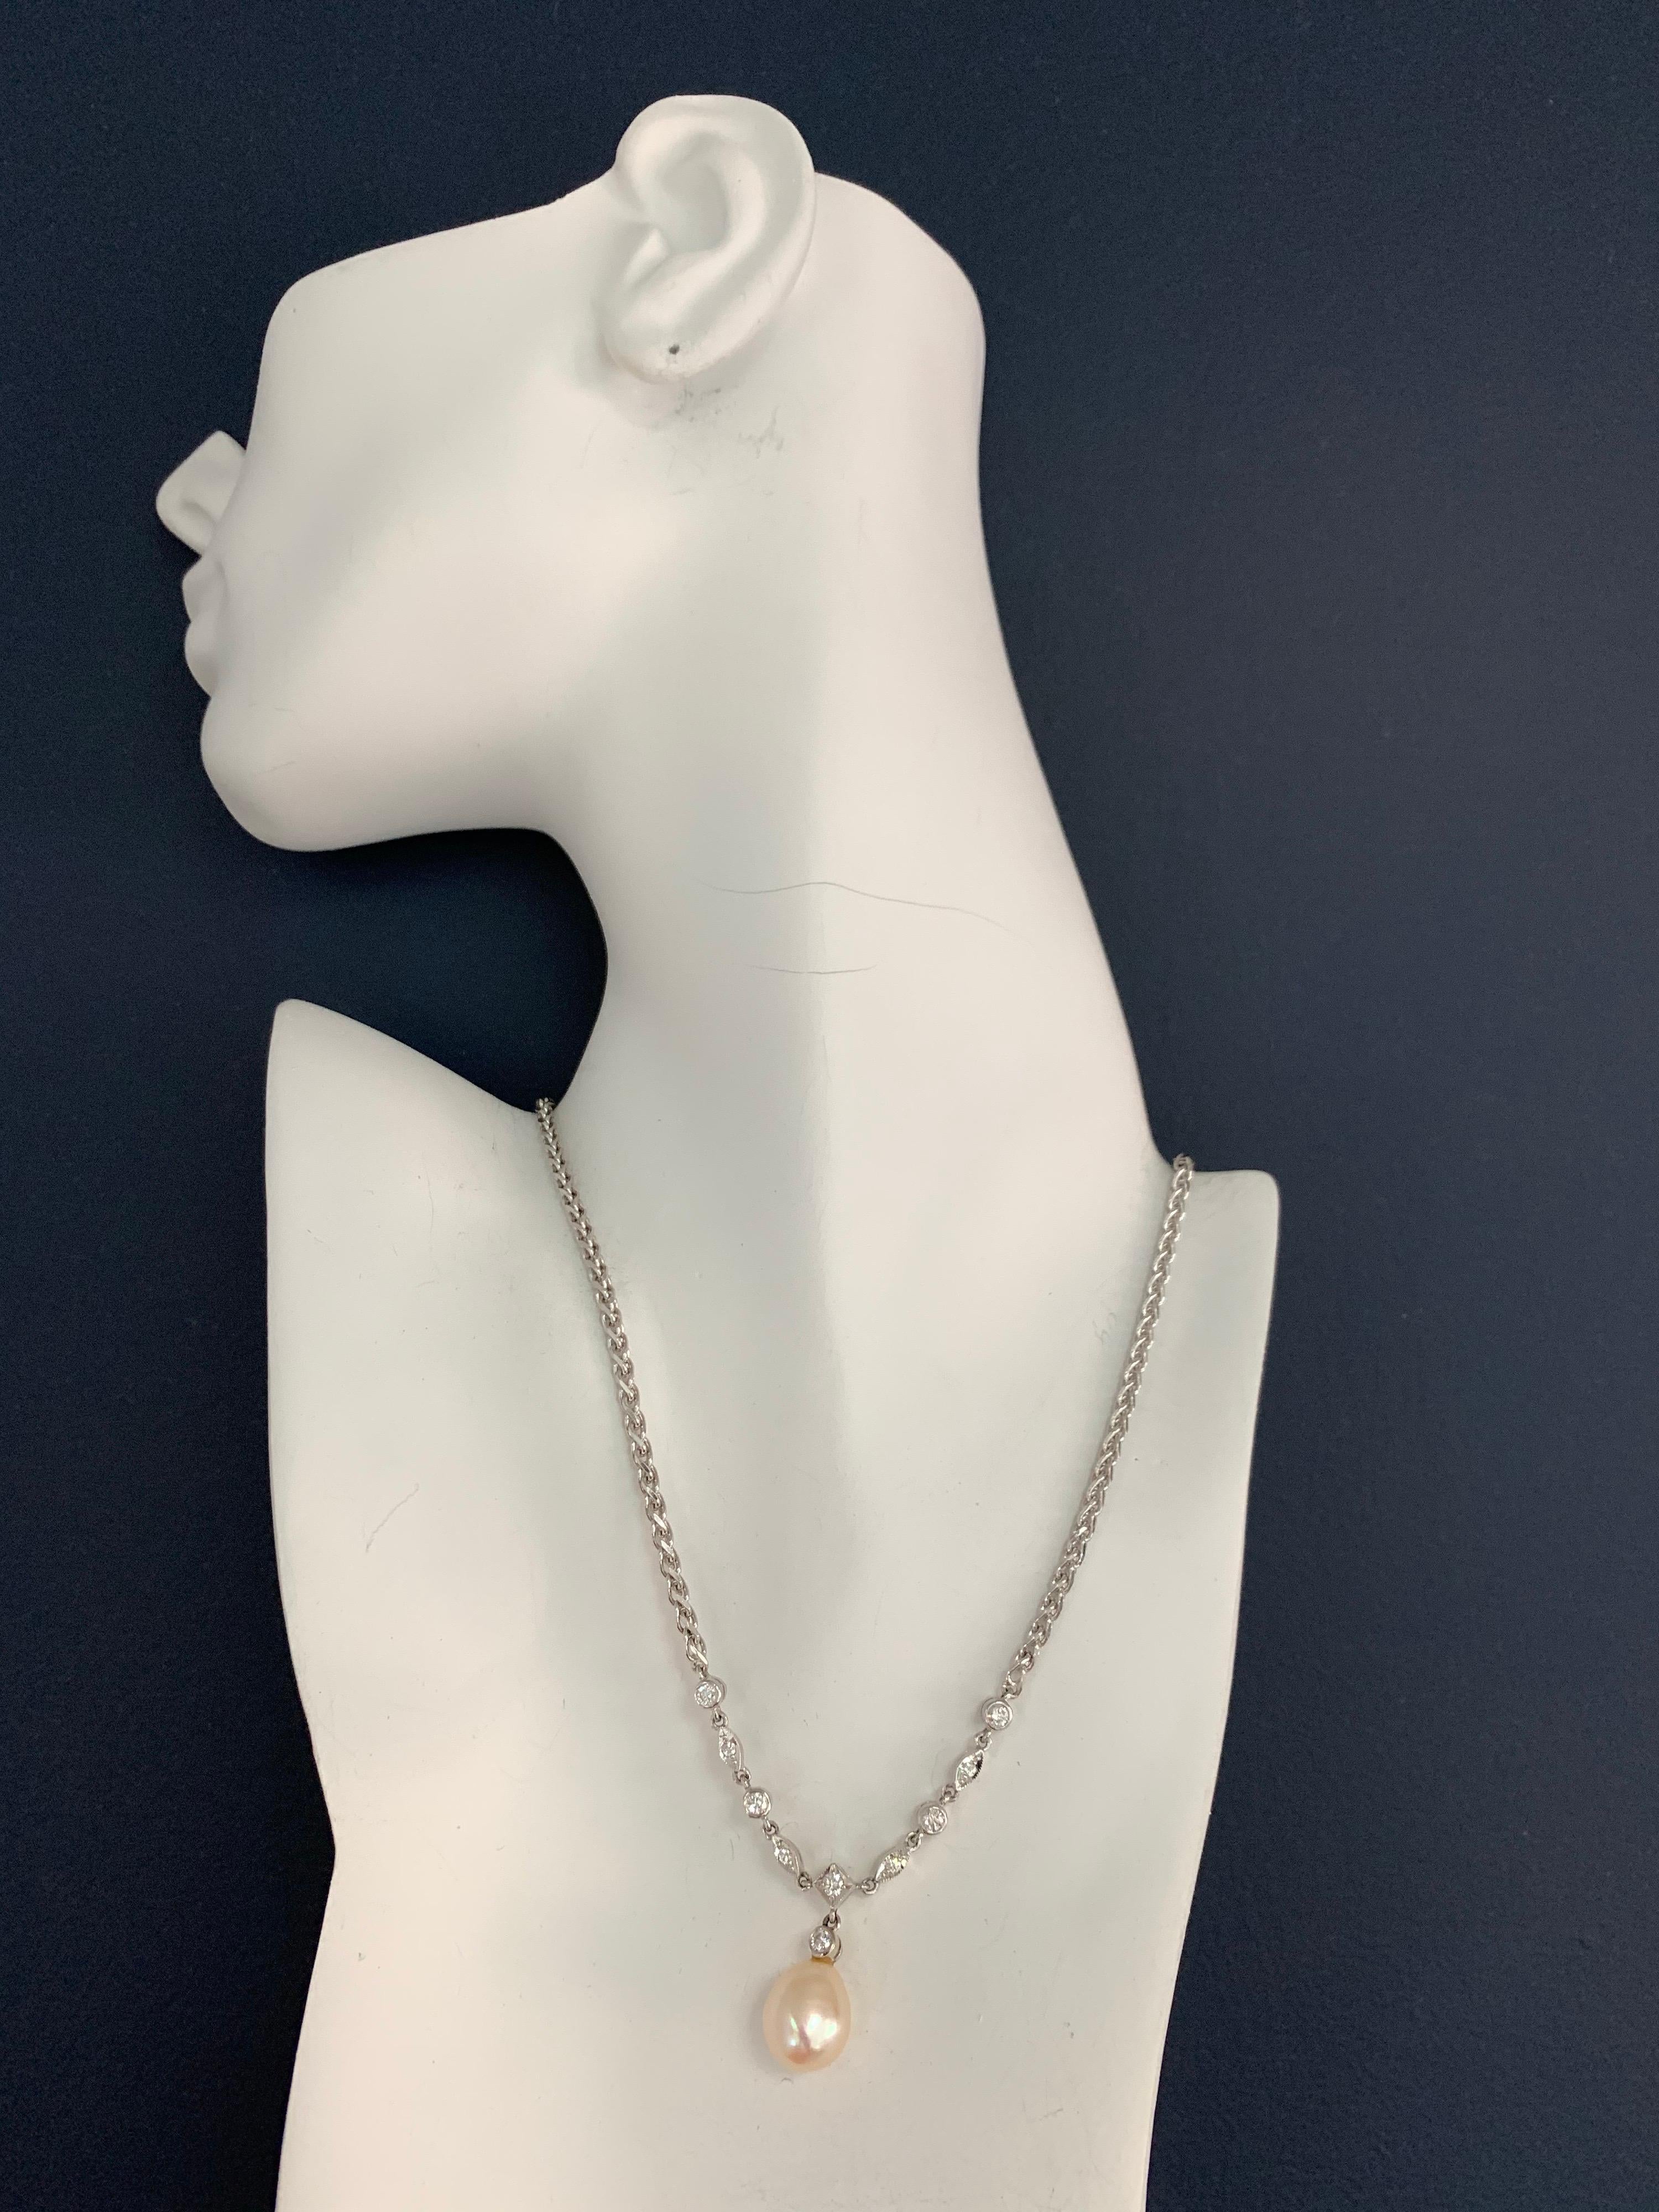 Stunning Italian 14k White Gold Necklace set with 0.50 carats (appx) of Natural colorless diamonds. The length of the necklace is 18